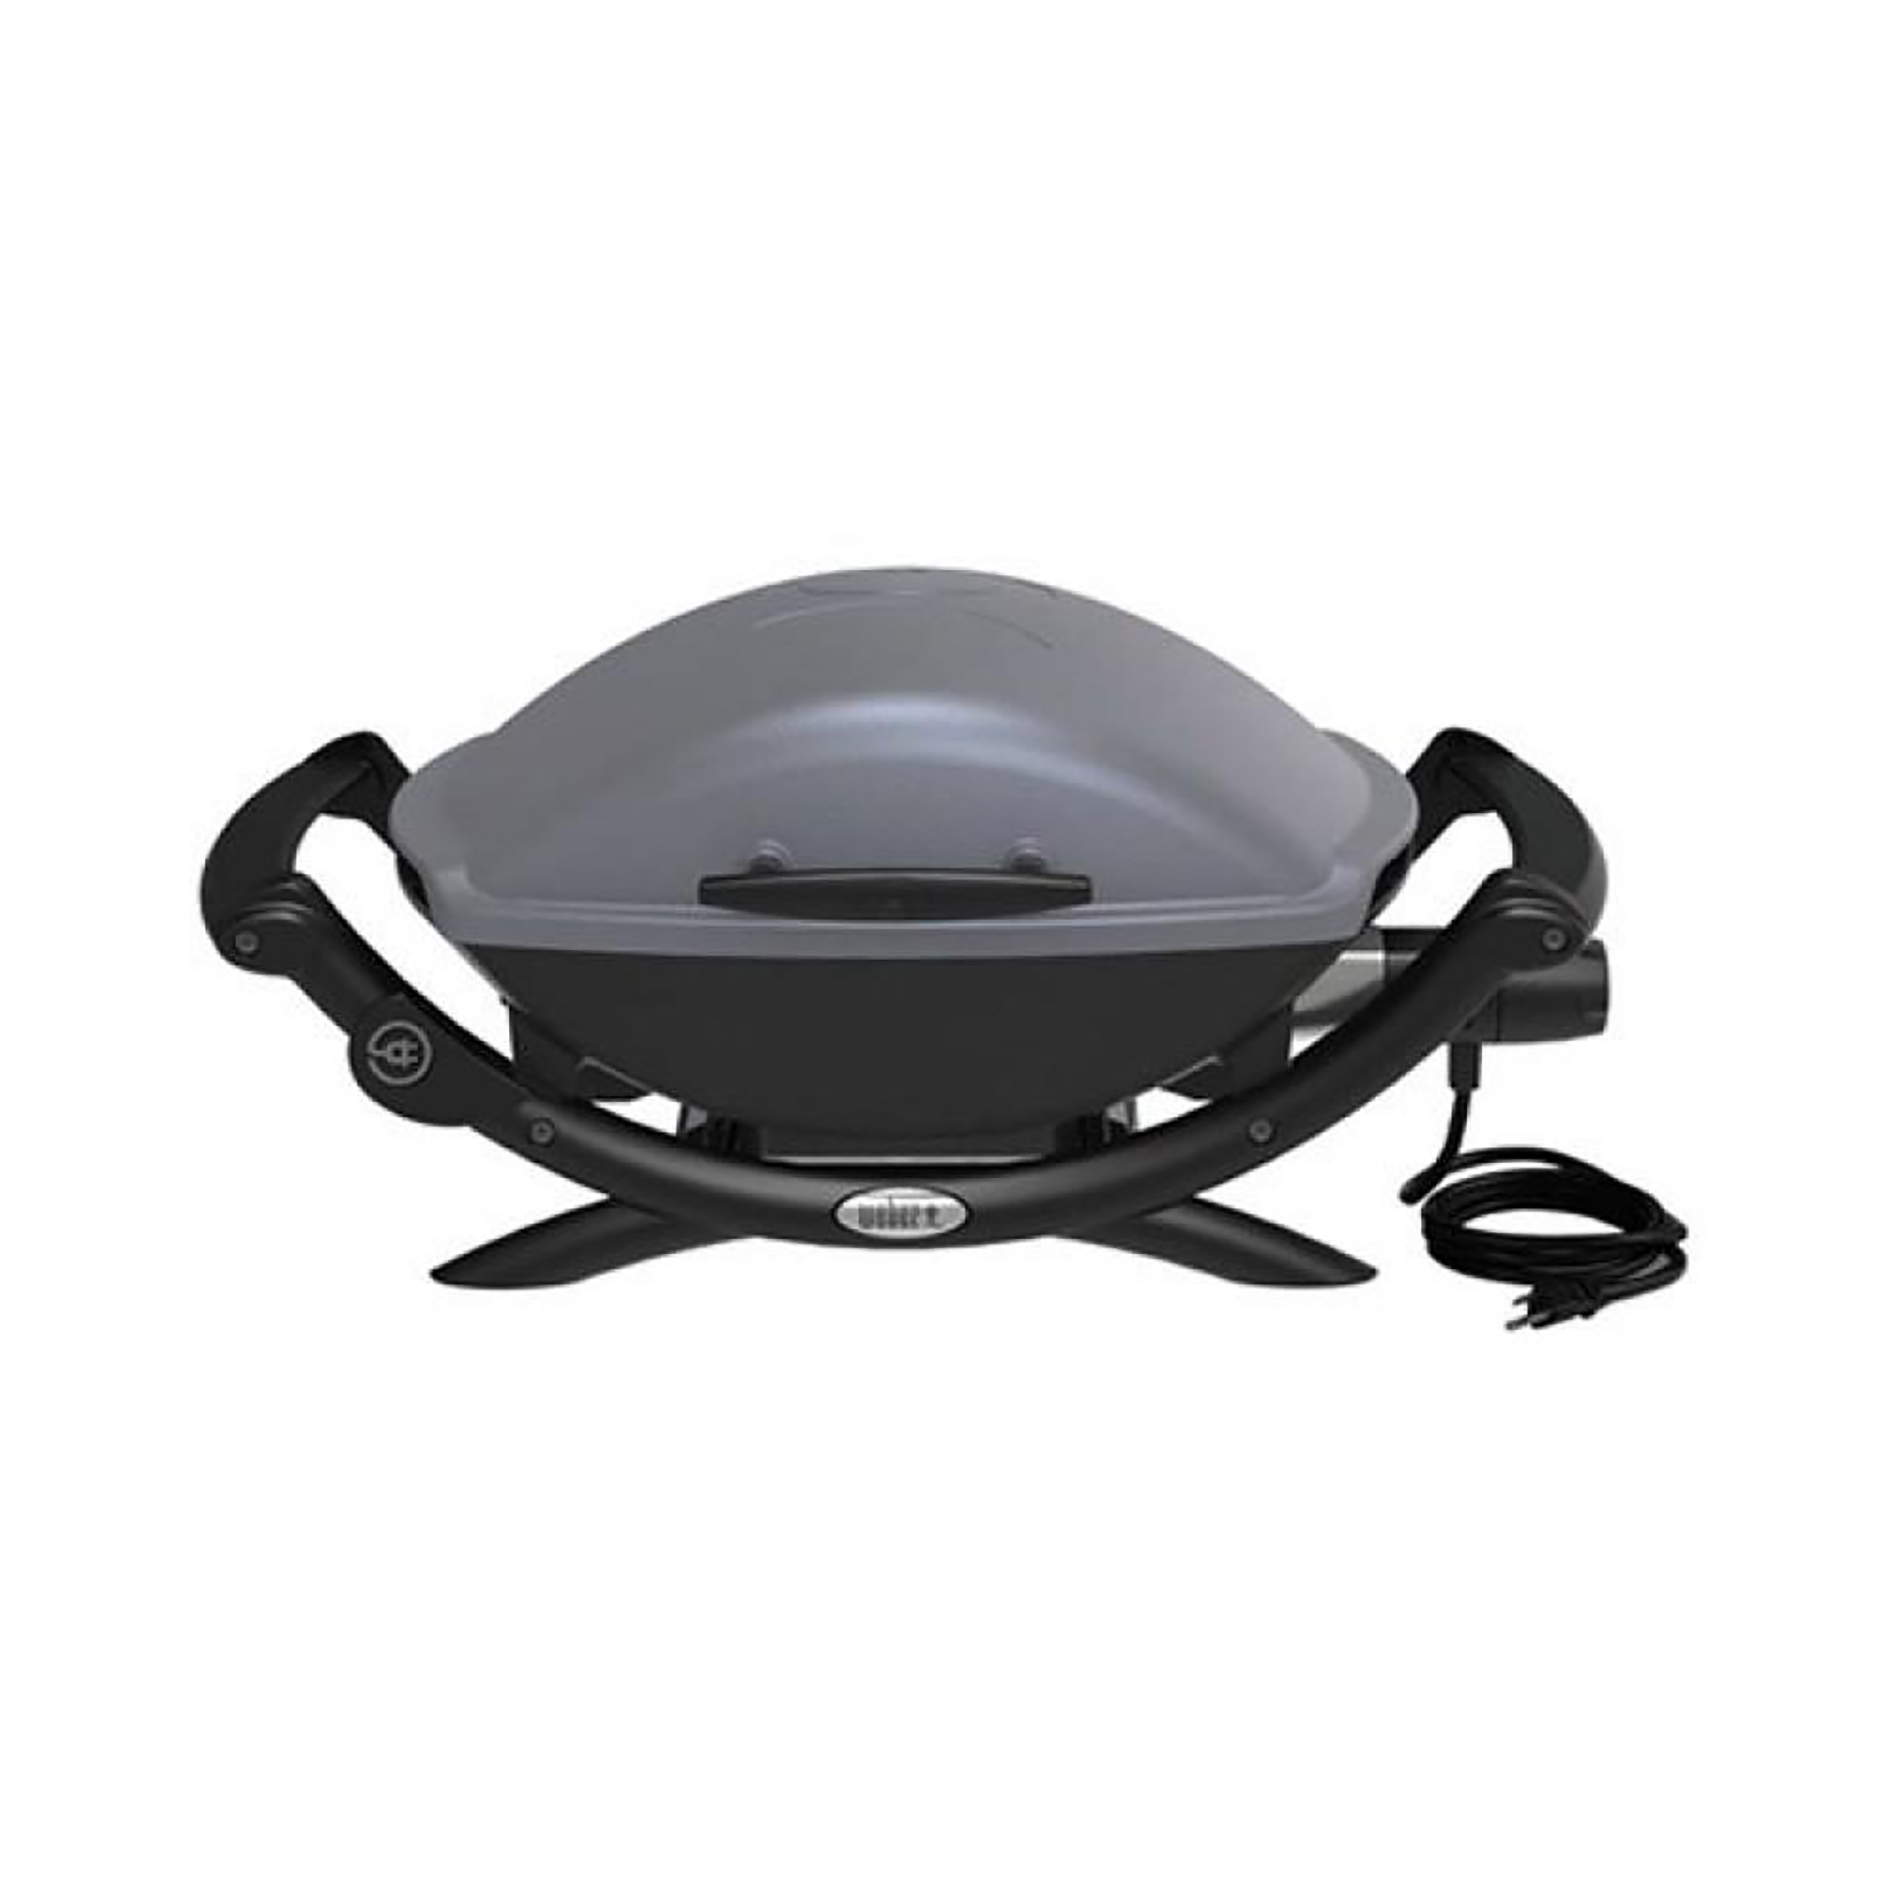 Weber 1 Burner Portable Electric Grill - Gray